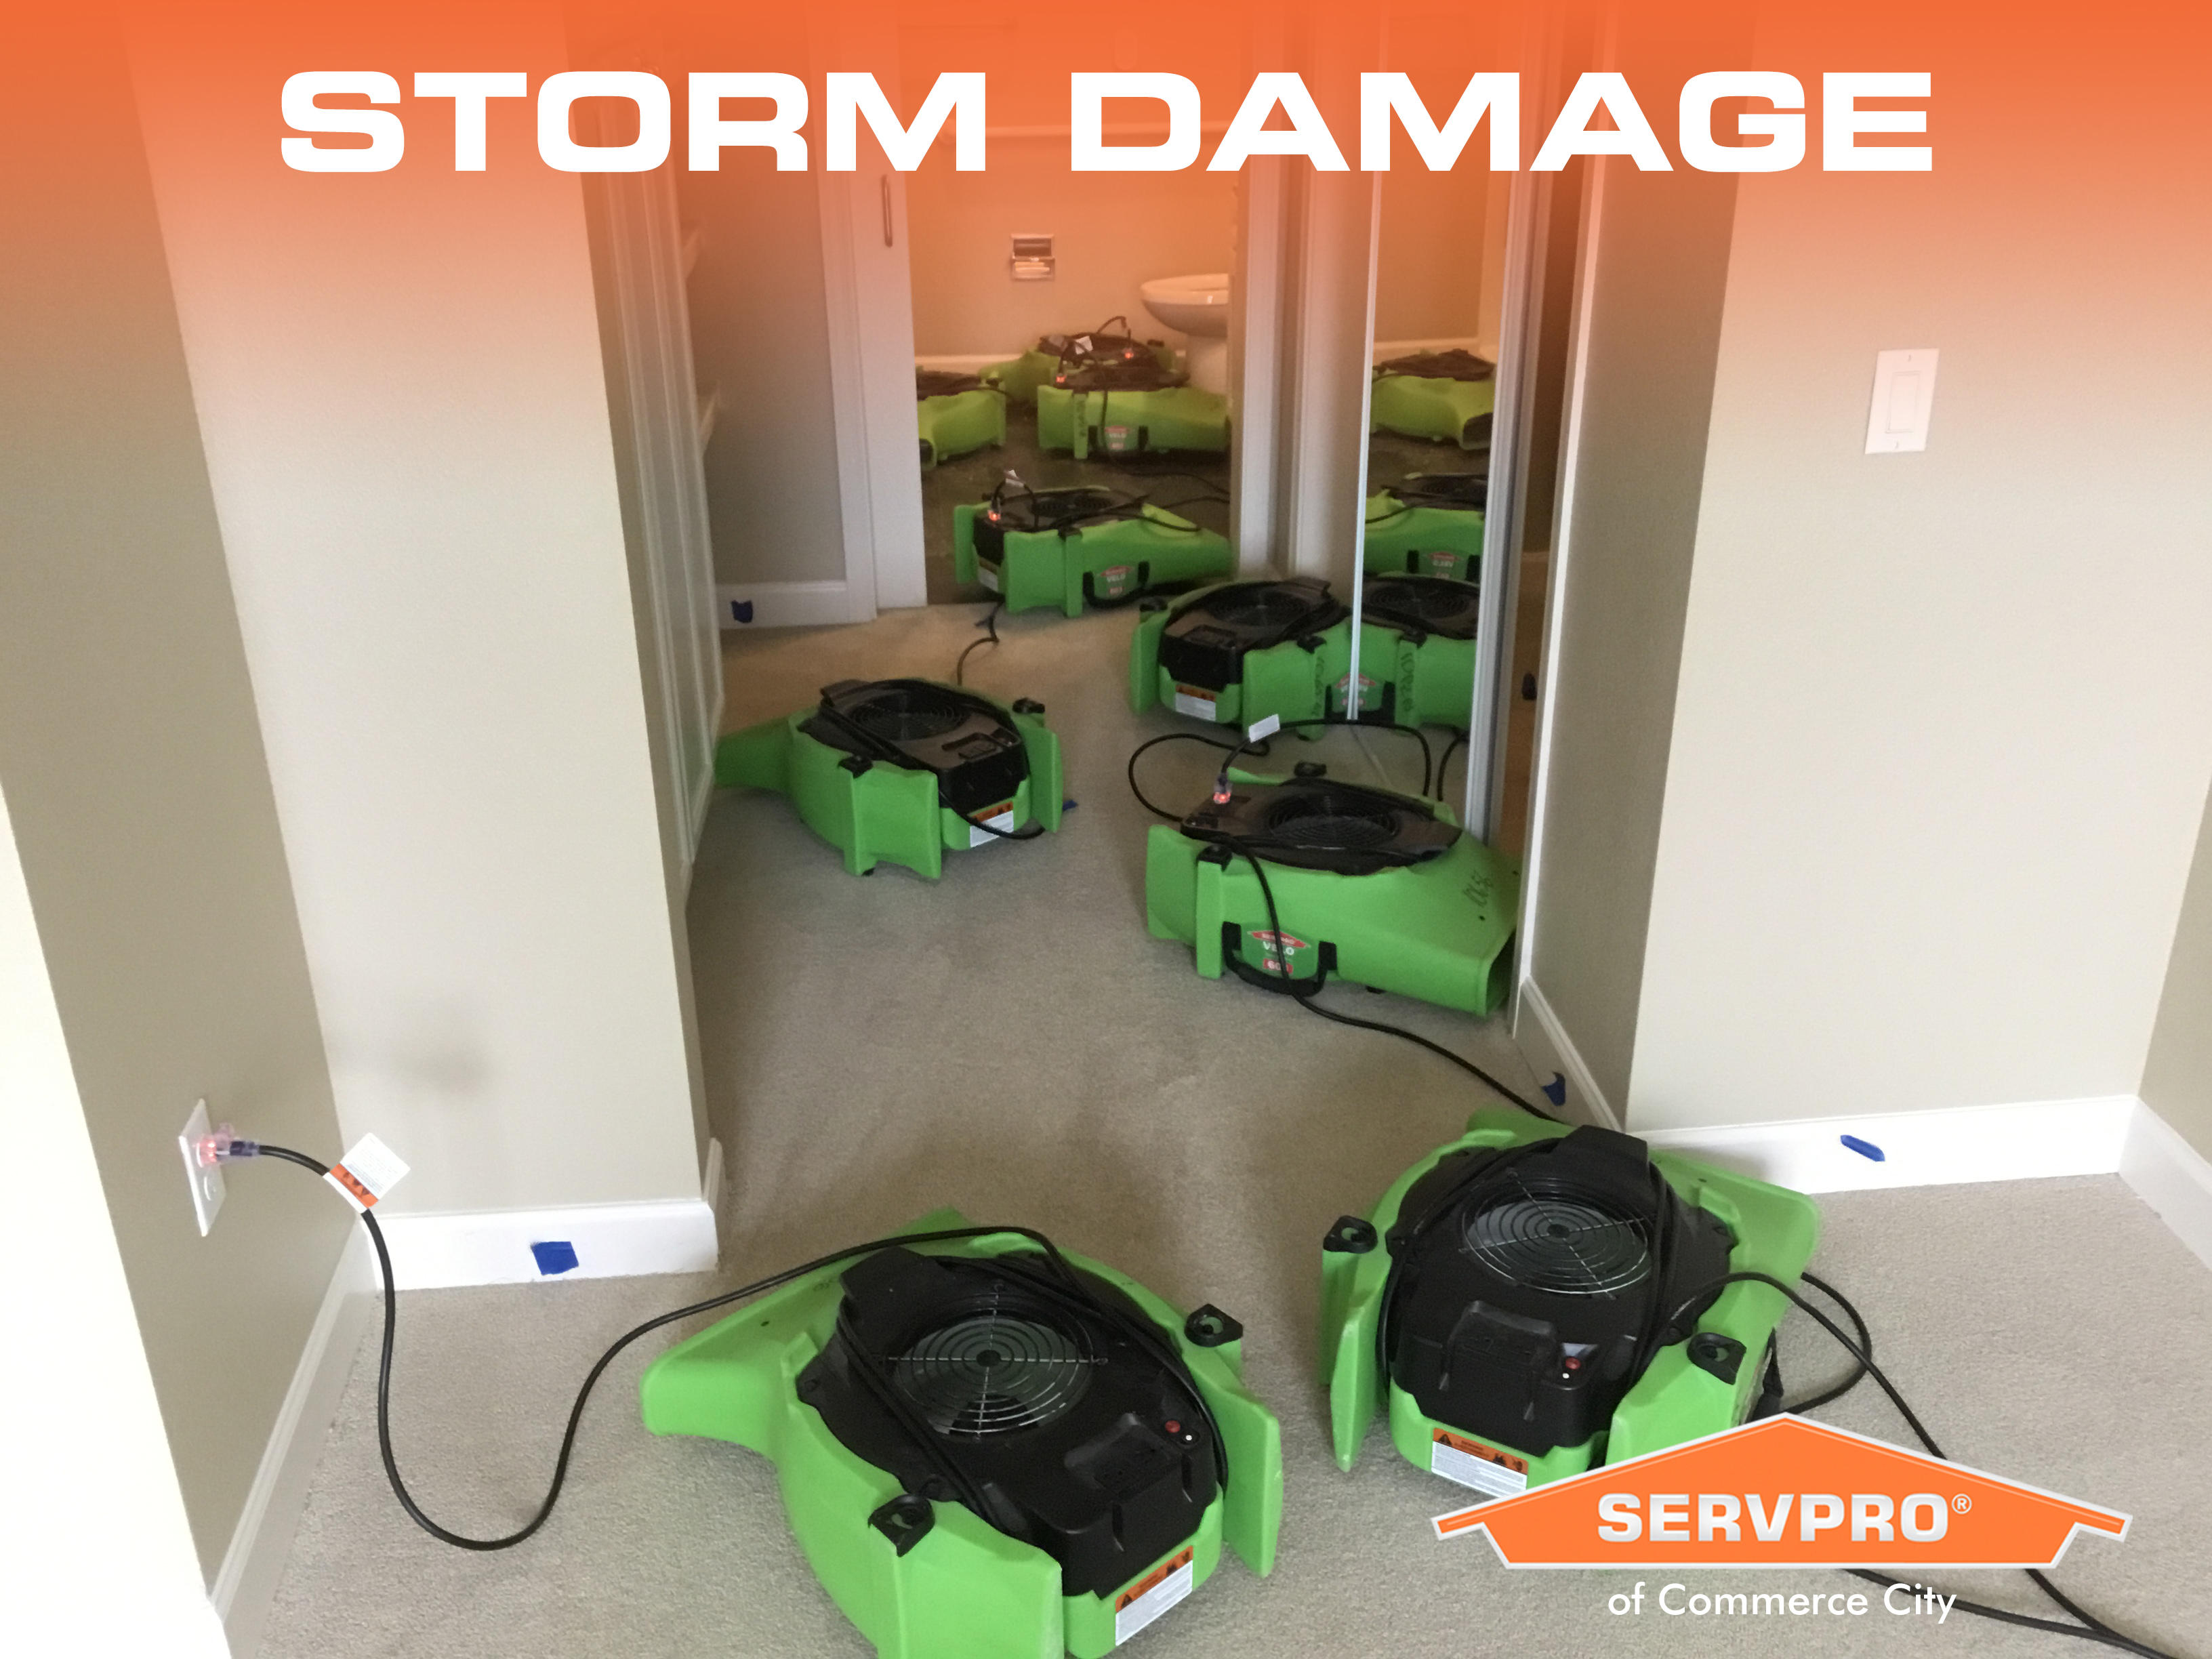 We can respond immediately with highly trained technicians who employ specialized equipment and techniques to restore your home or business back to pre-storm condition.